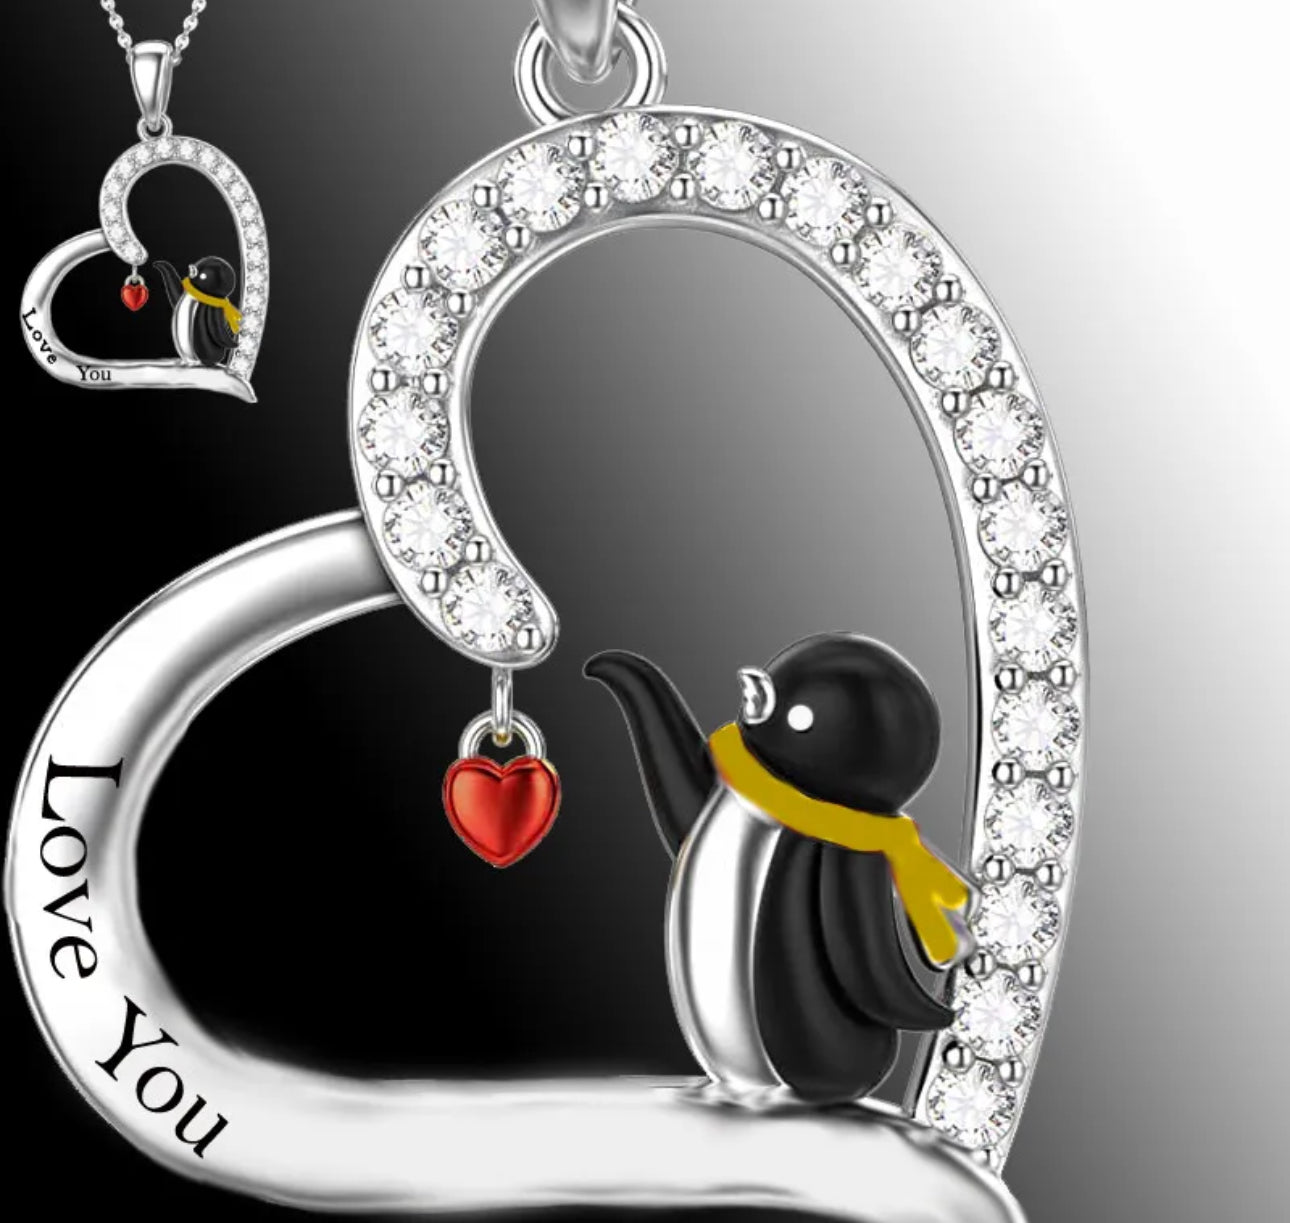 Penguin love you necklace